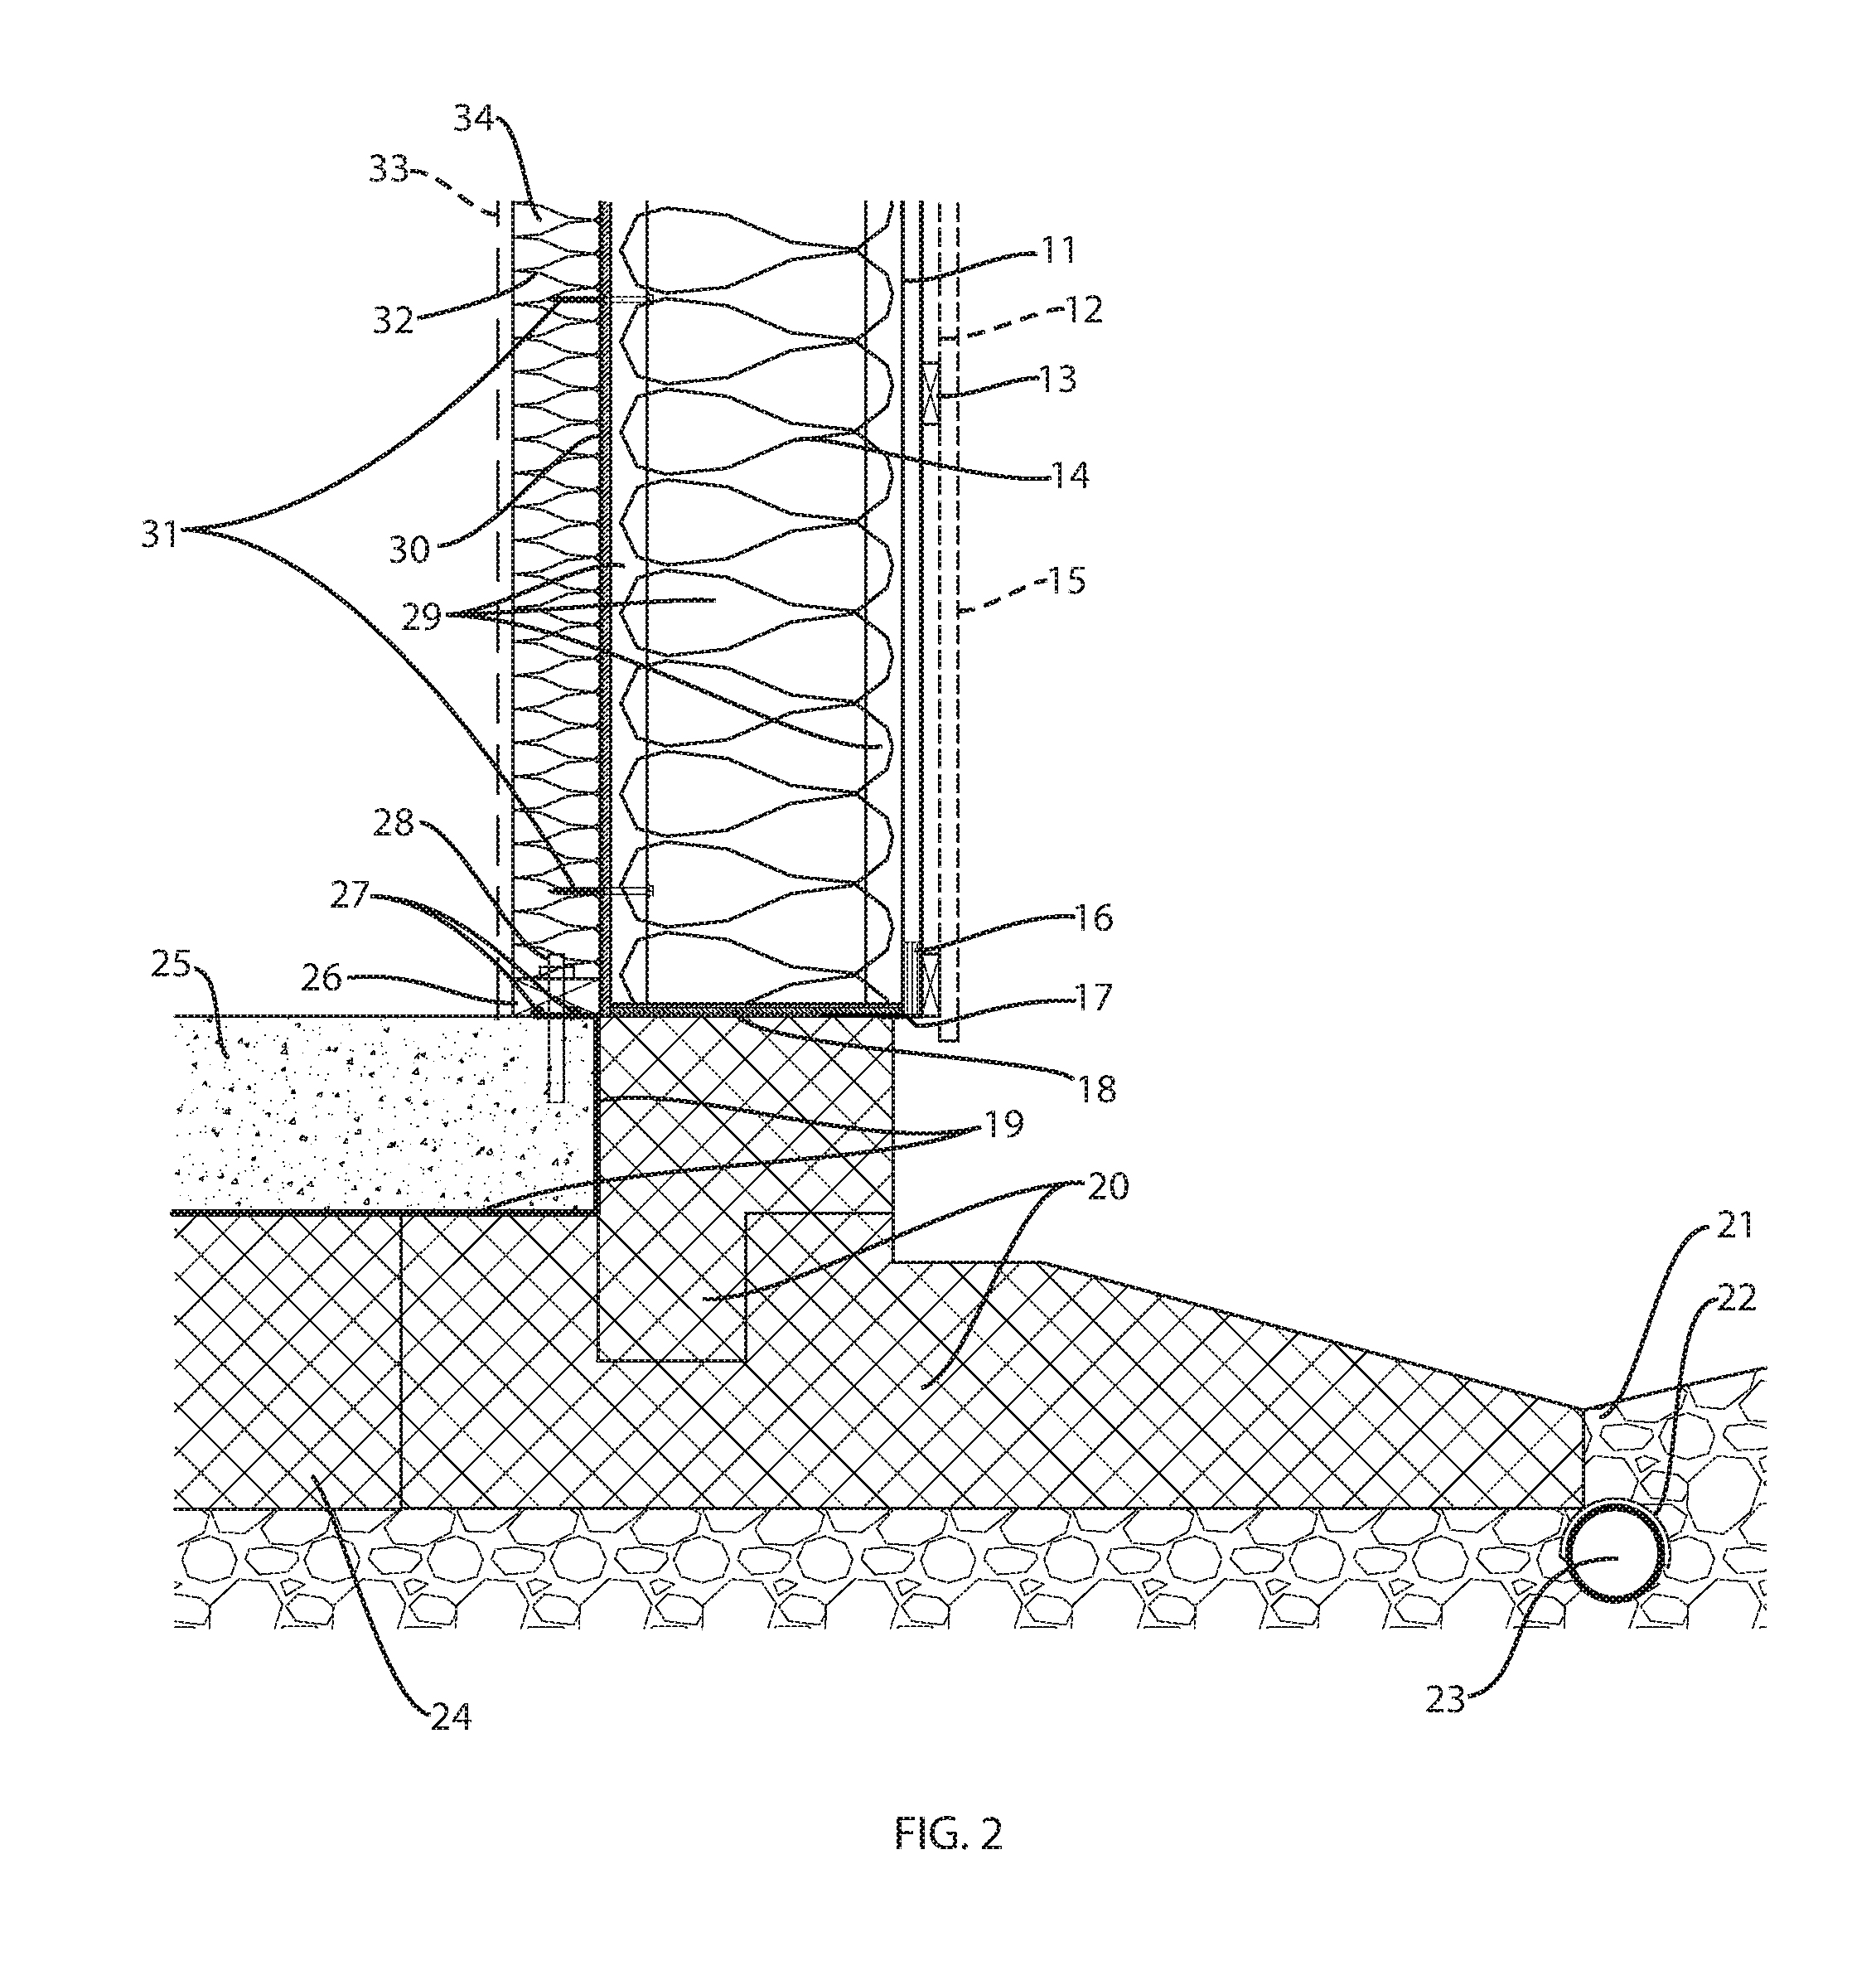 System and method for panelized, superinsulated building envelopes